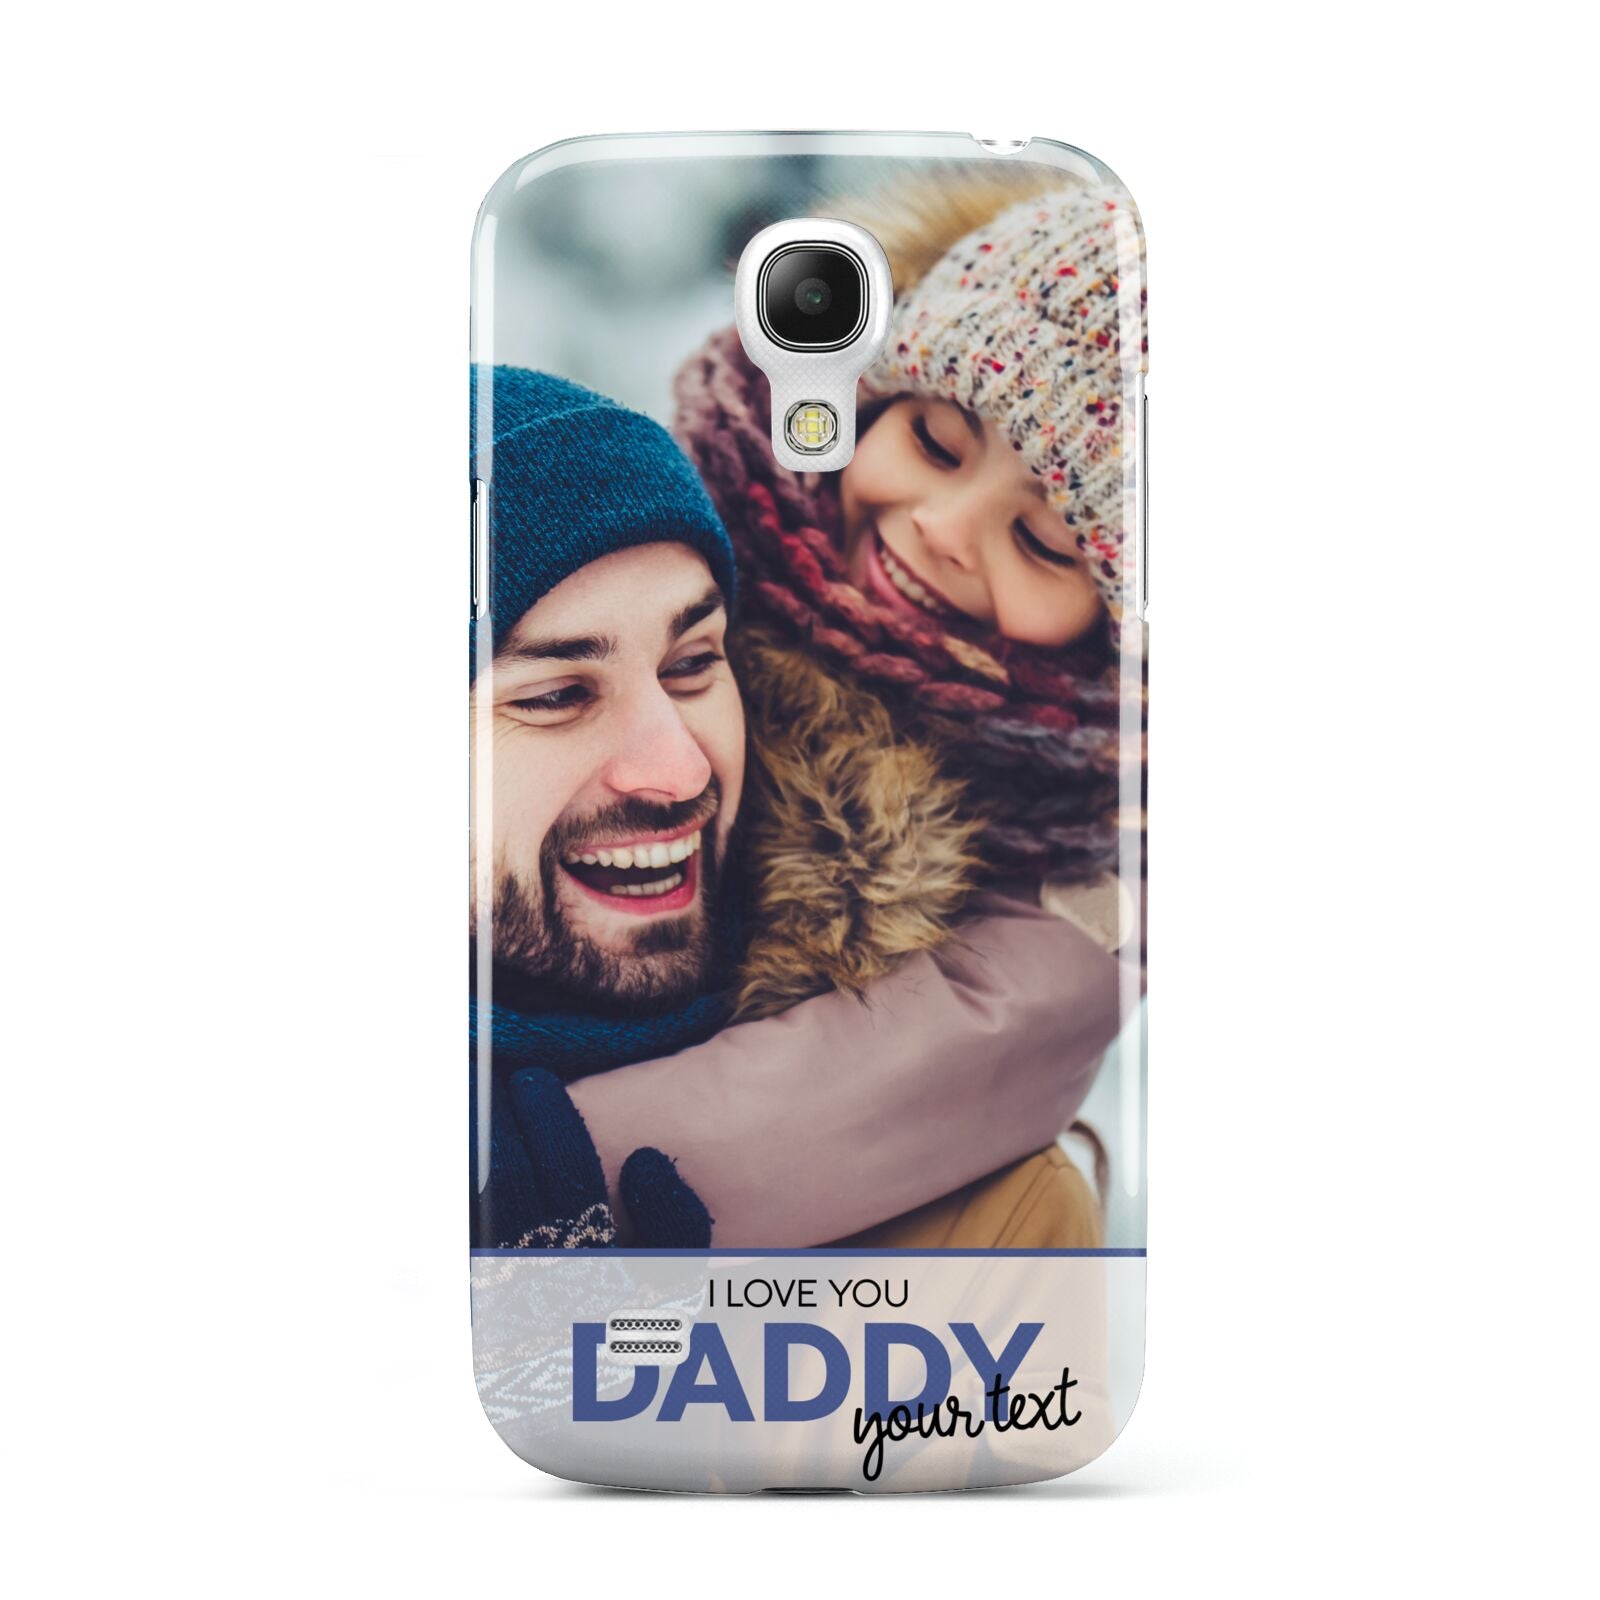 I Love You Daddy Personalised Photo Upload and Name Samsung Galaxy S4 Mini Case